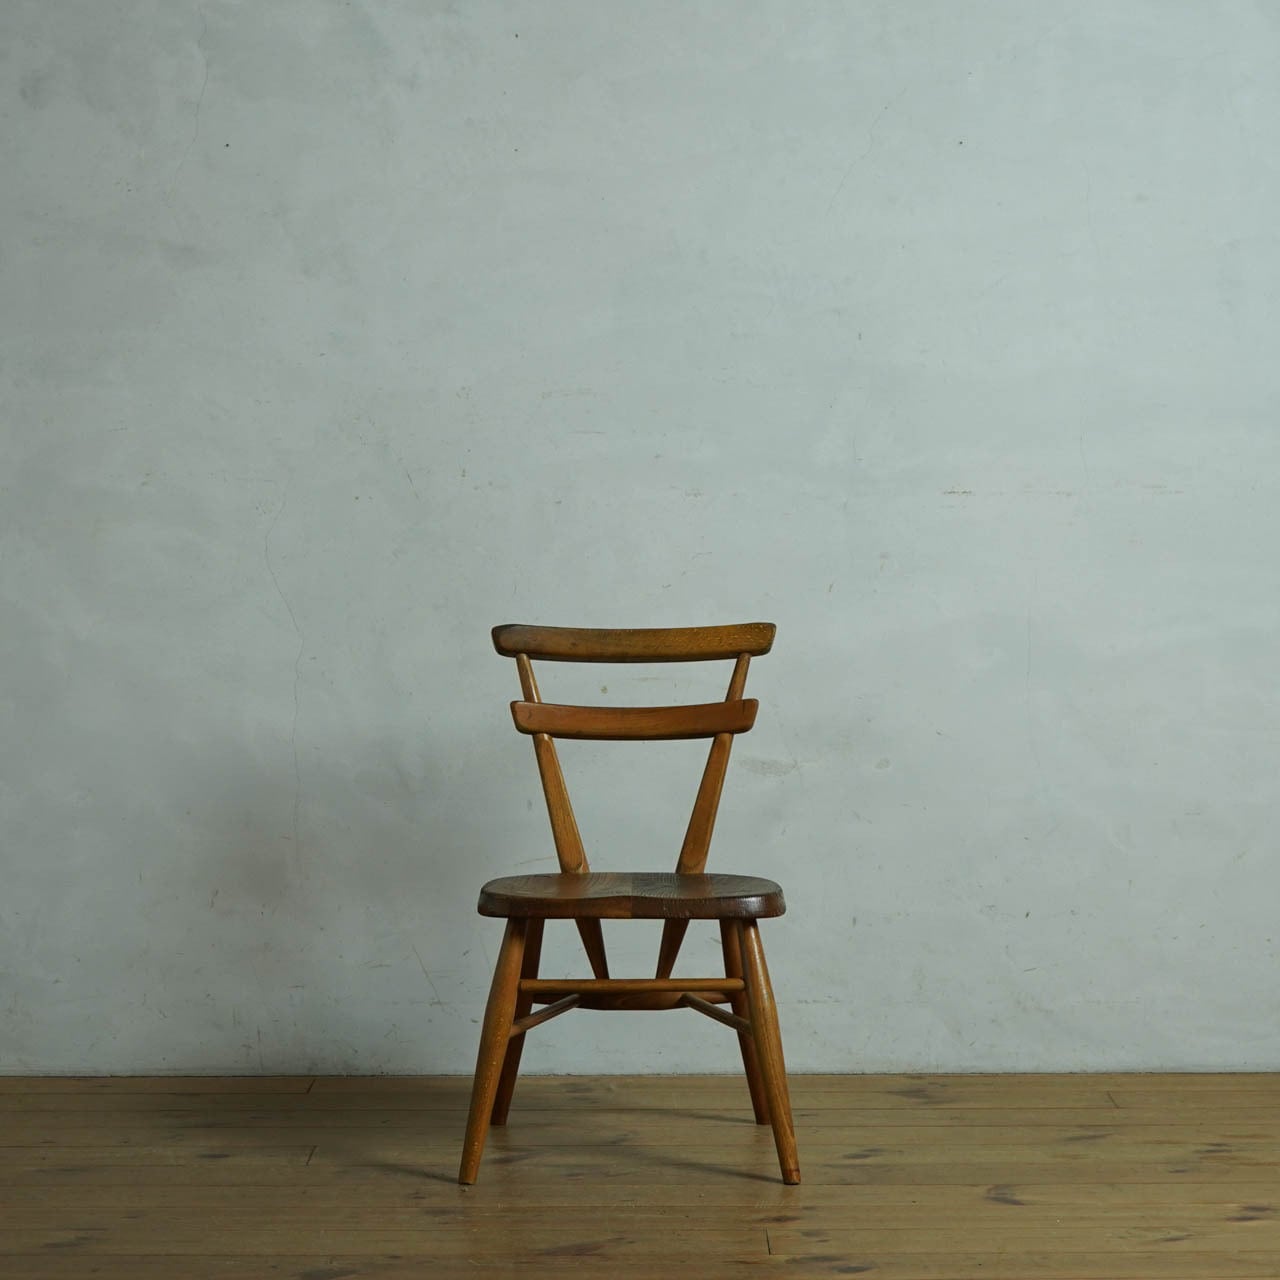 Ercol Stacking School Chair / アーコール スタッキングスクール チェア 【A】〈椅子・スクールチェア・キッズチェア・アンティーク・ヴィンテージ・店舗什器〉112573